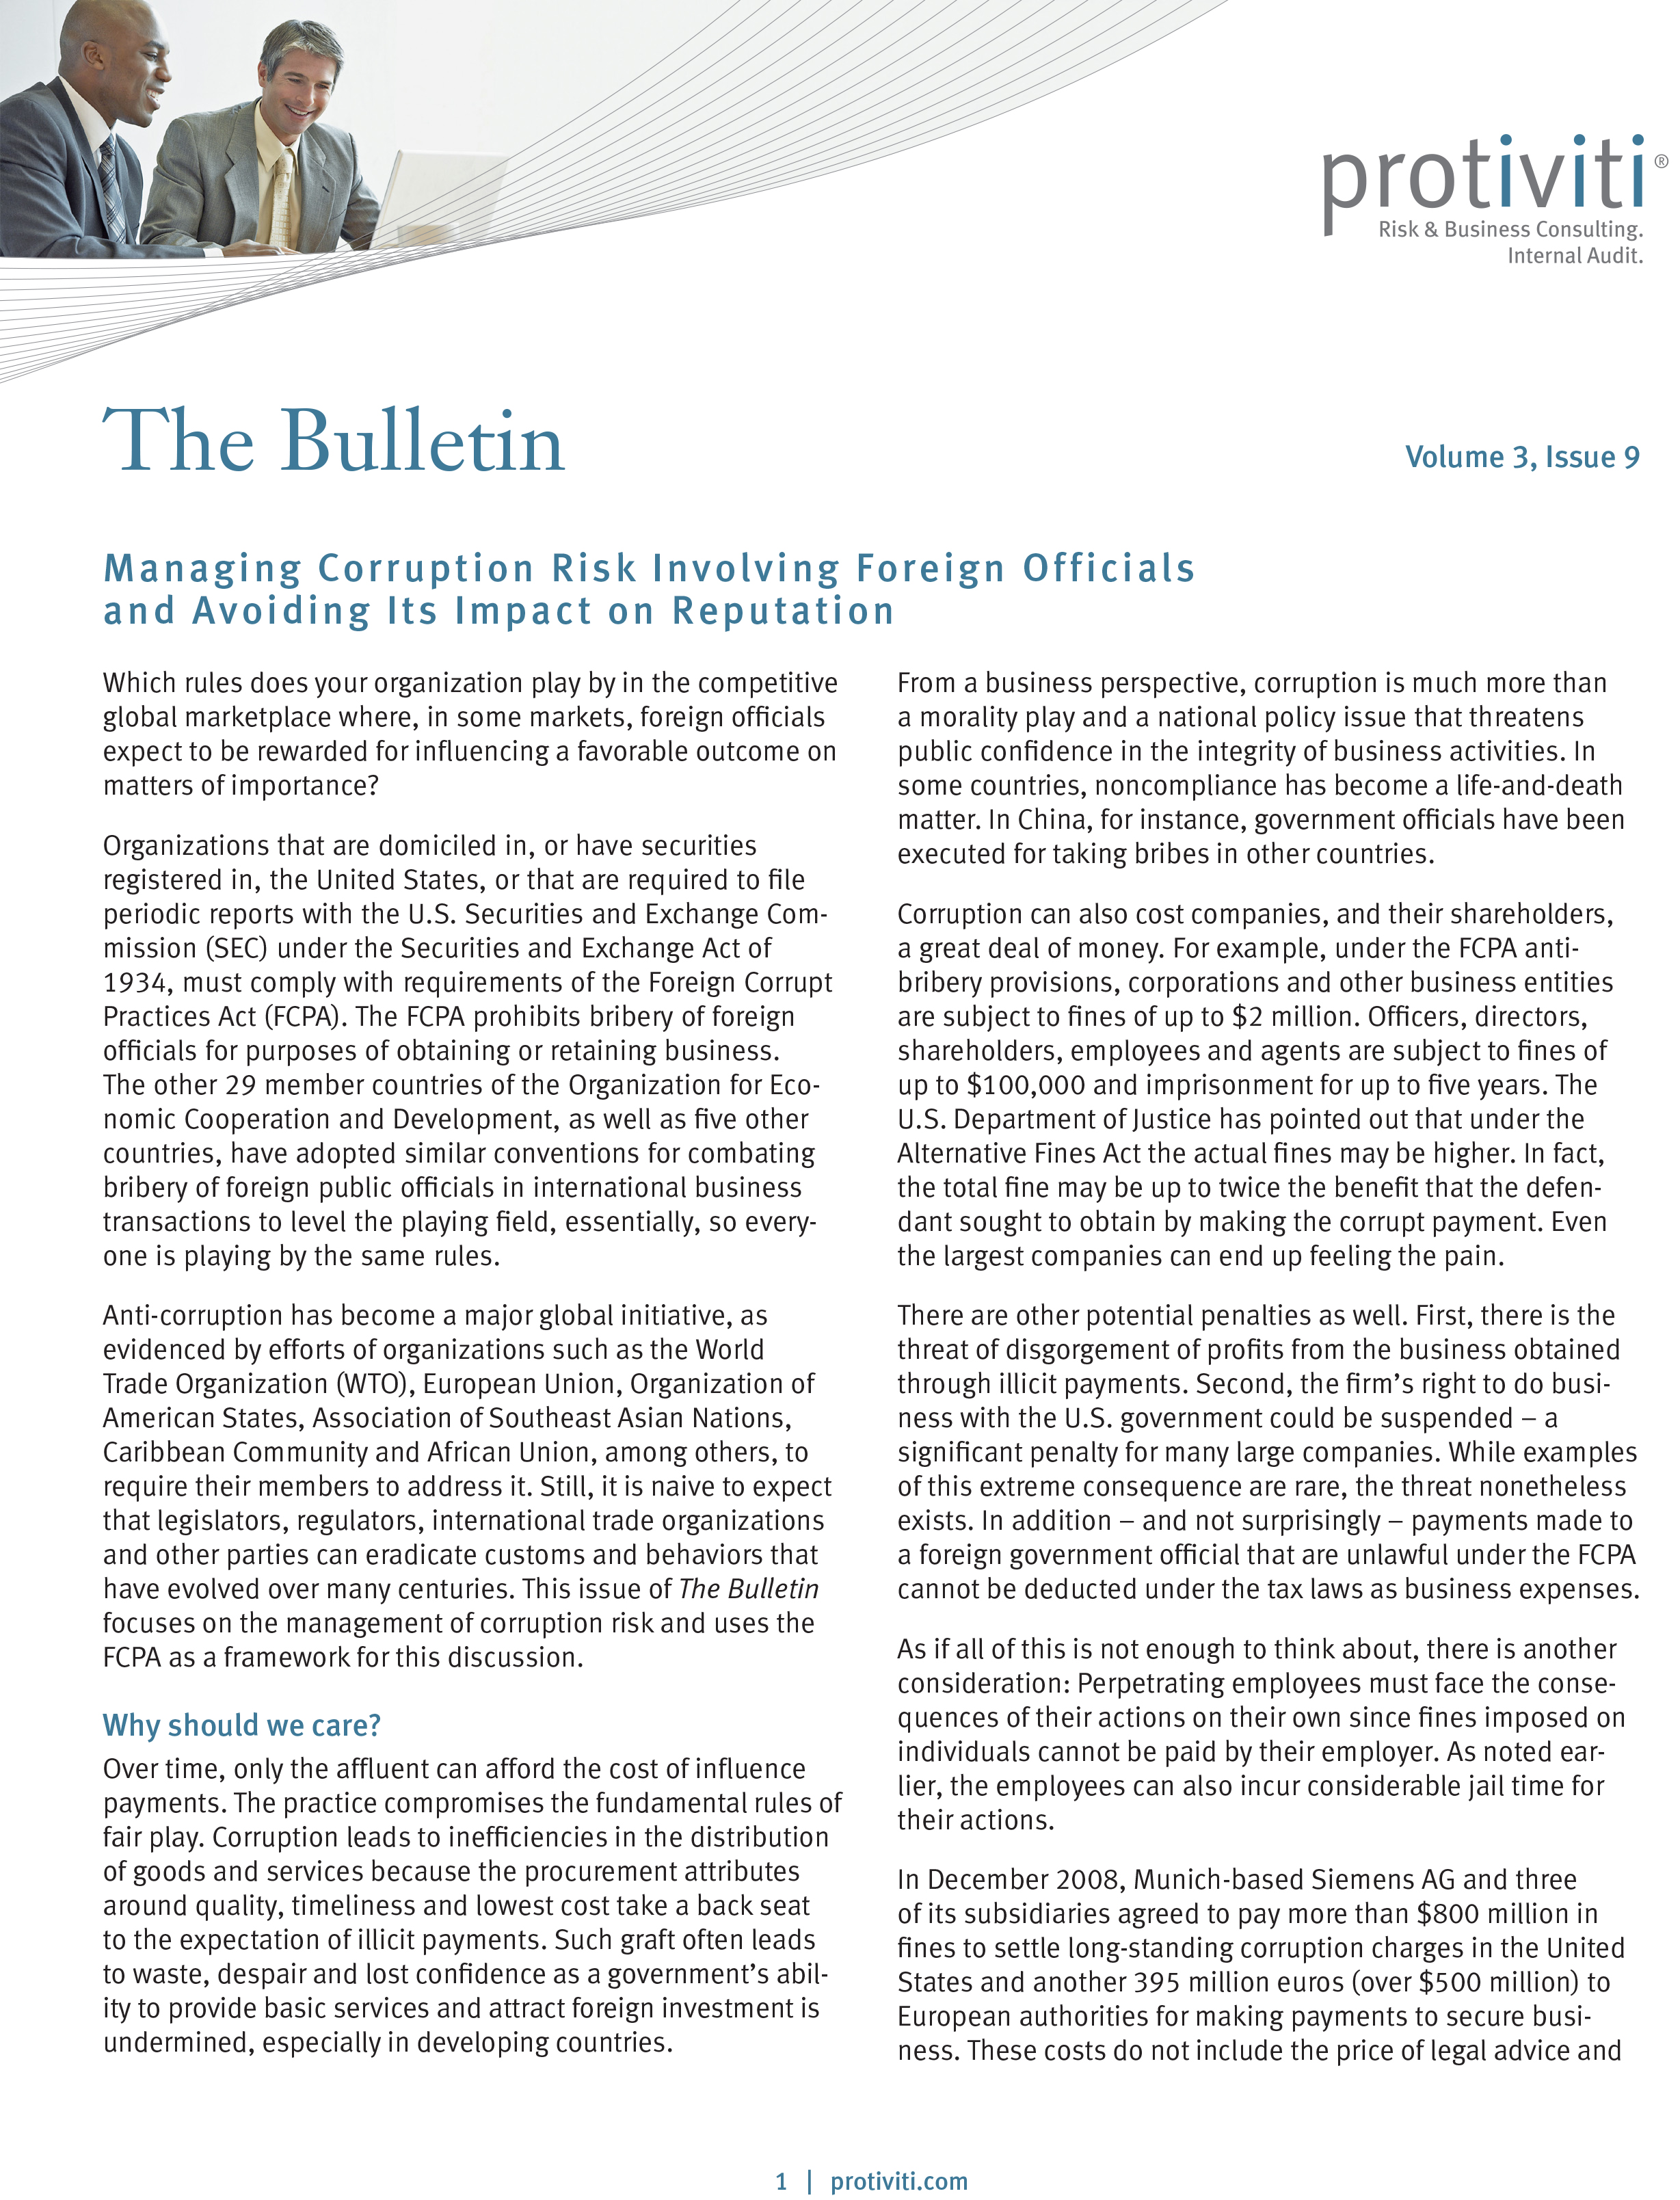 Screenshot of the first page of Managing Corruption Risk Involving Foreign Officials and Avoiding Its Impact on Reputation